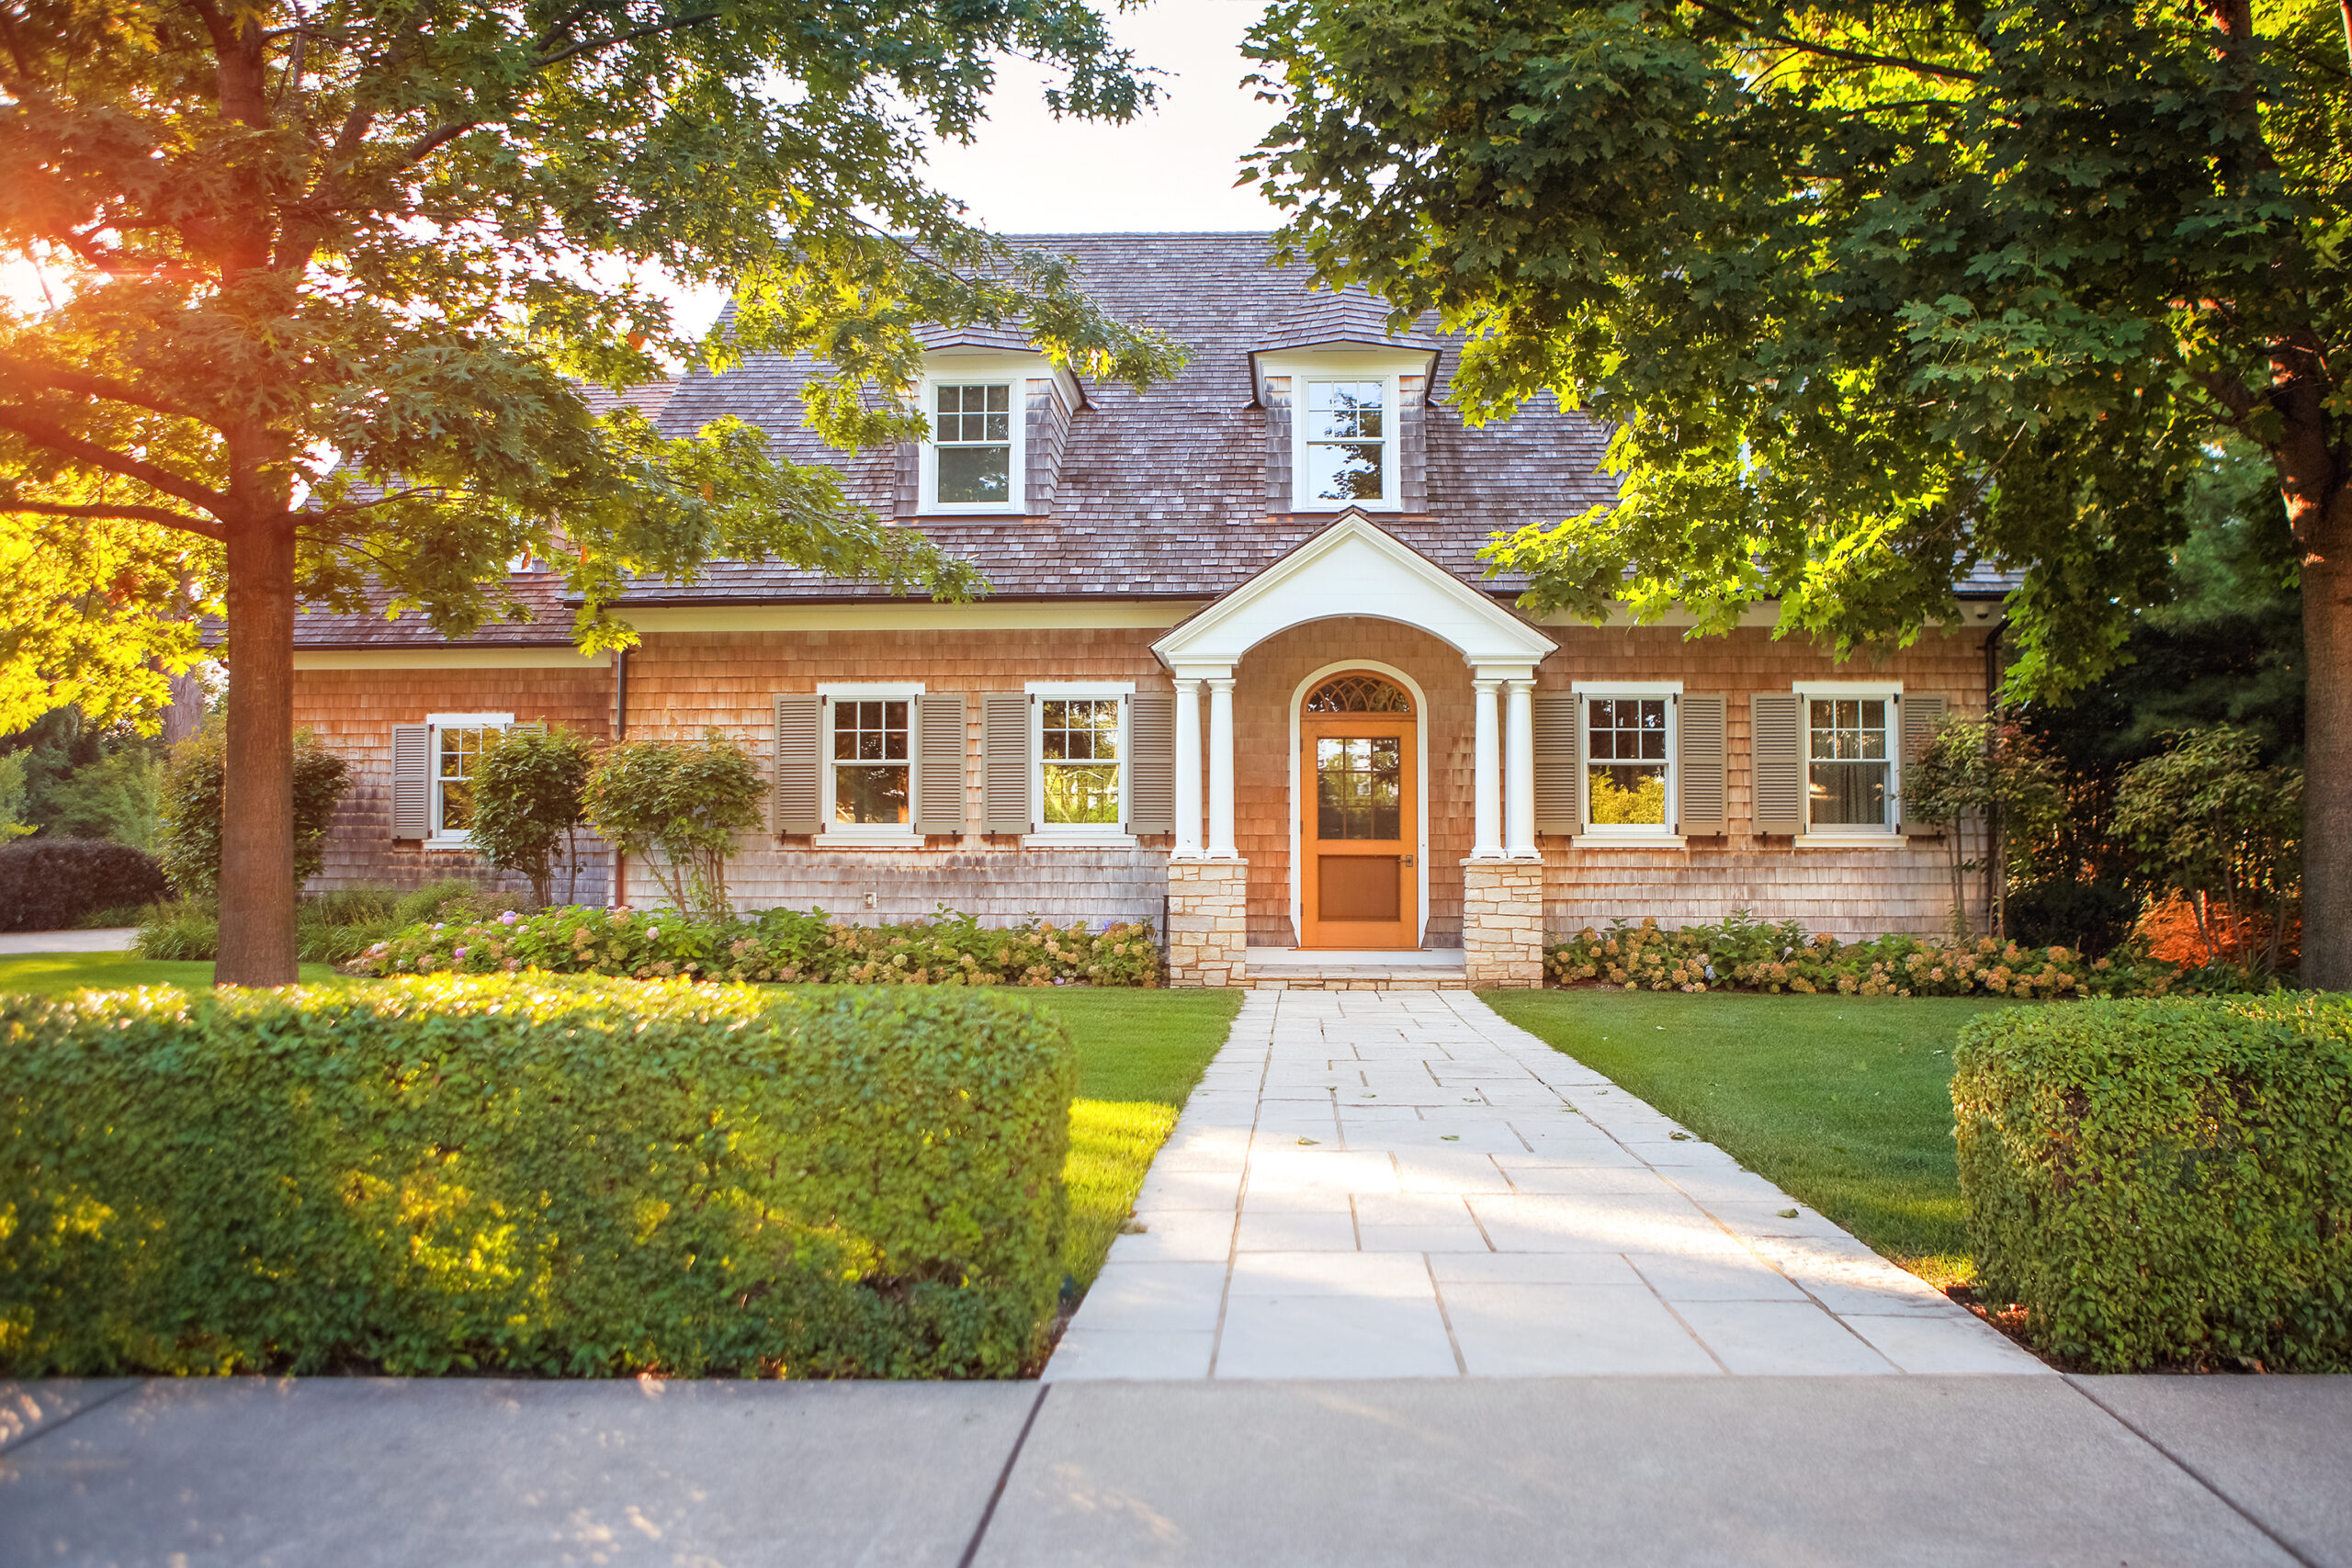 How to Choose the Right Exterior for Your Home